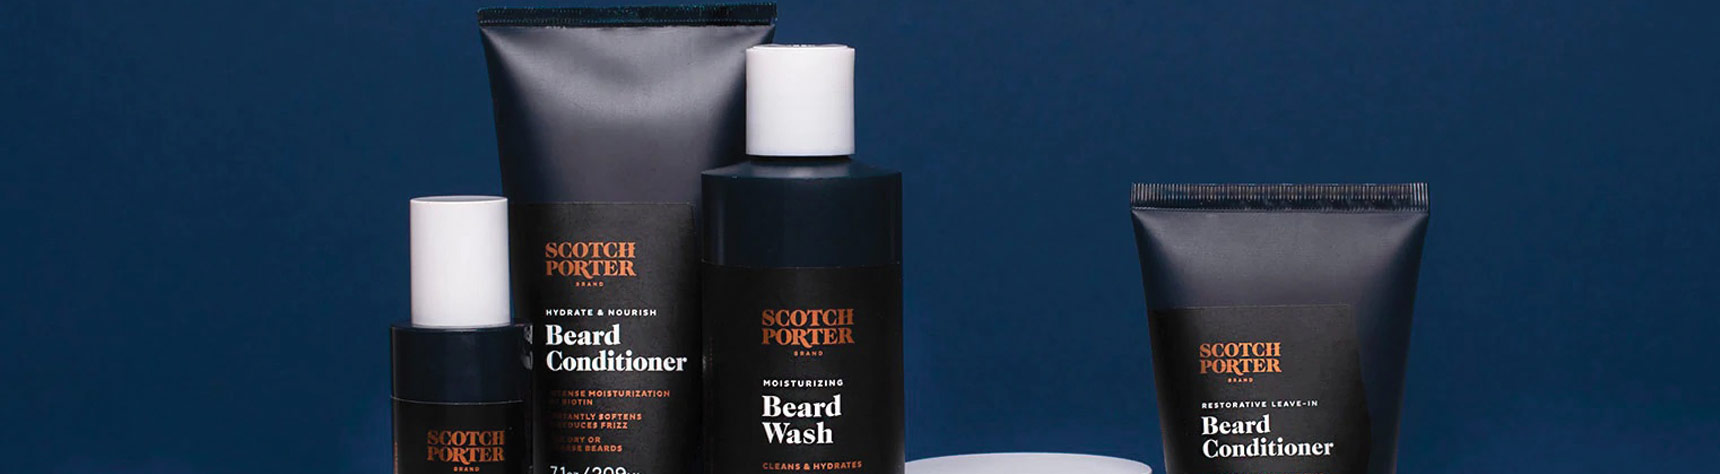 Scotch Porter Products for Men | Buy Online Now